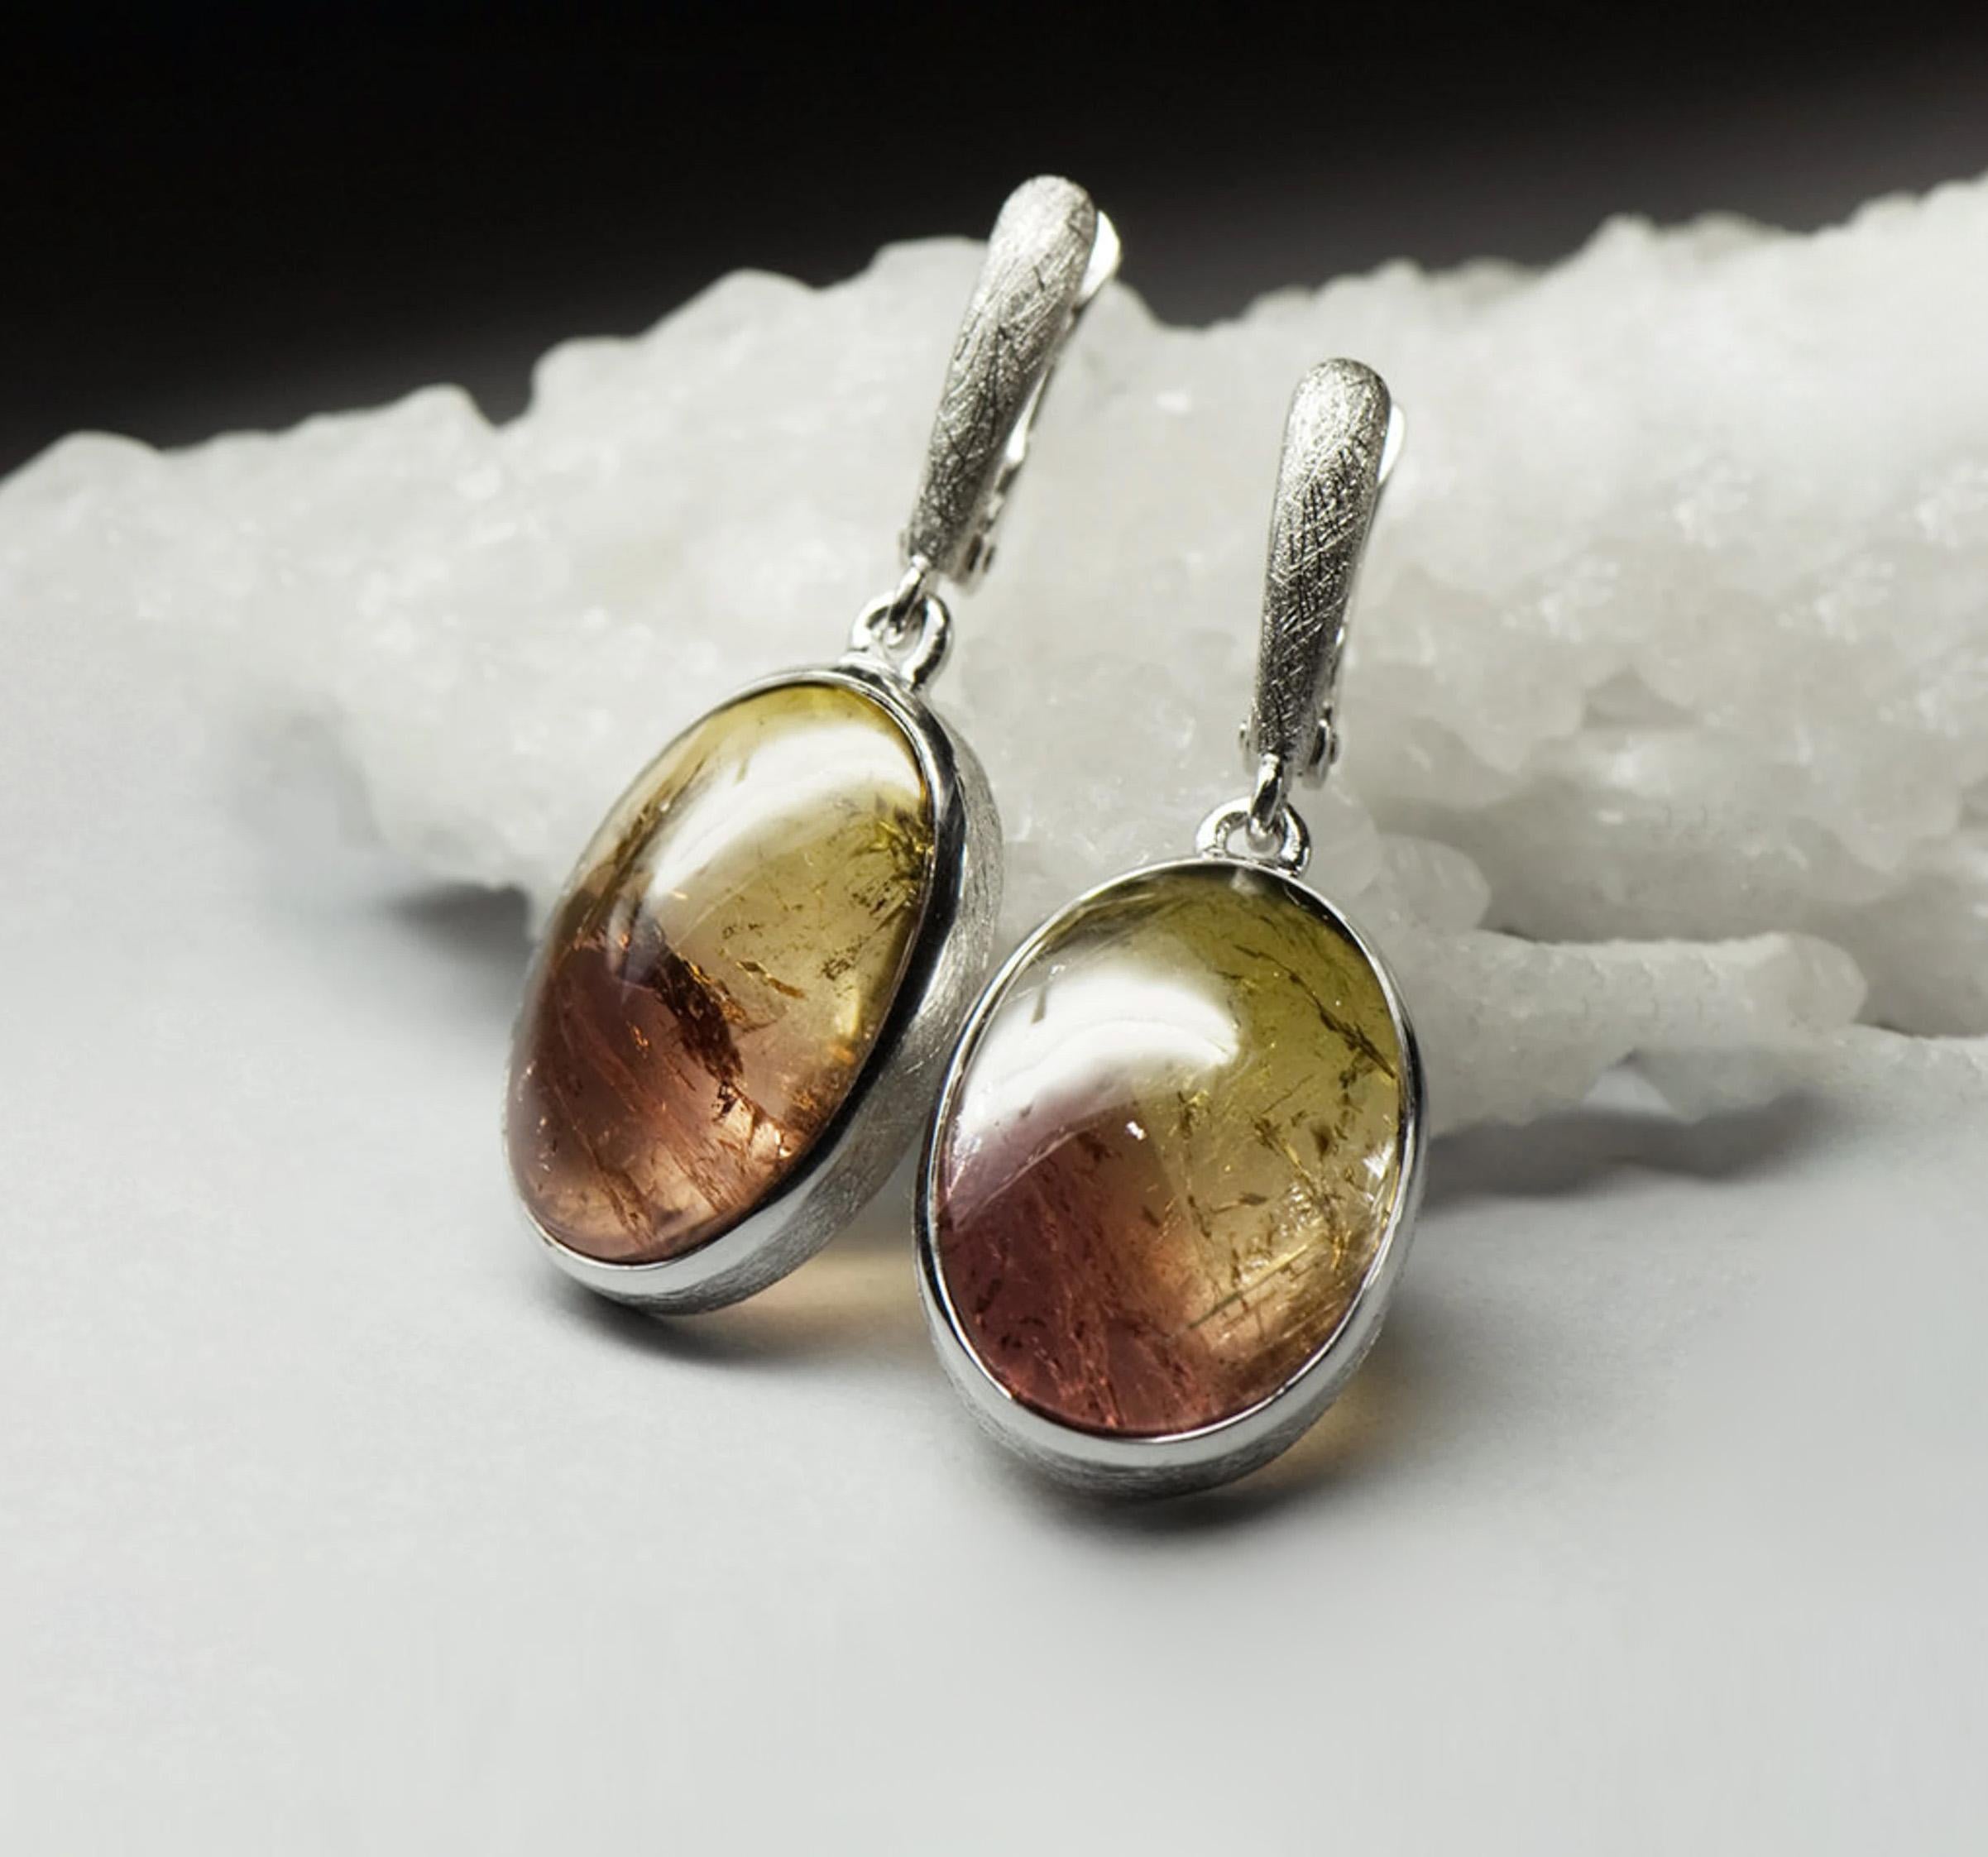 Matte finish silver earrings with natural bicolor Tourmaline 
fine quality cabochon cut  gemstone
stone measurements - 0.2 x 0.55 x 0.79 in / 5 х 14 х 20 mm
stones weight - 30 carats
earrings length - 1.46 in / 37 mm
earrings weight - 10.49